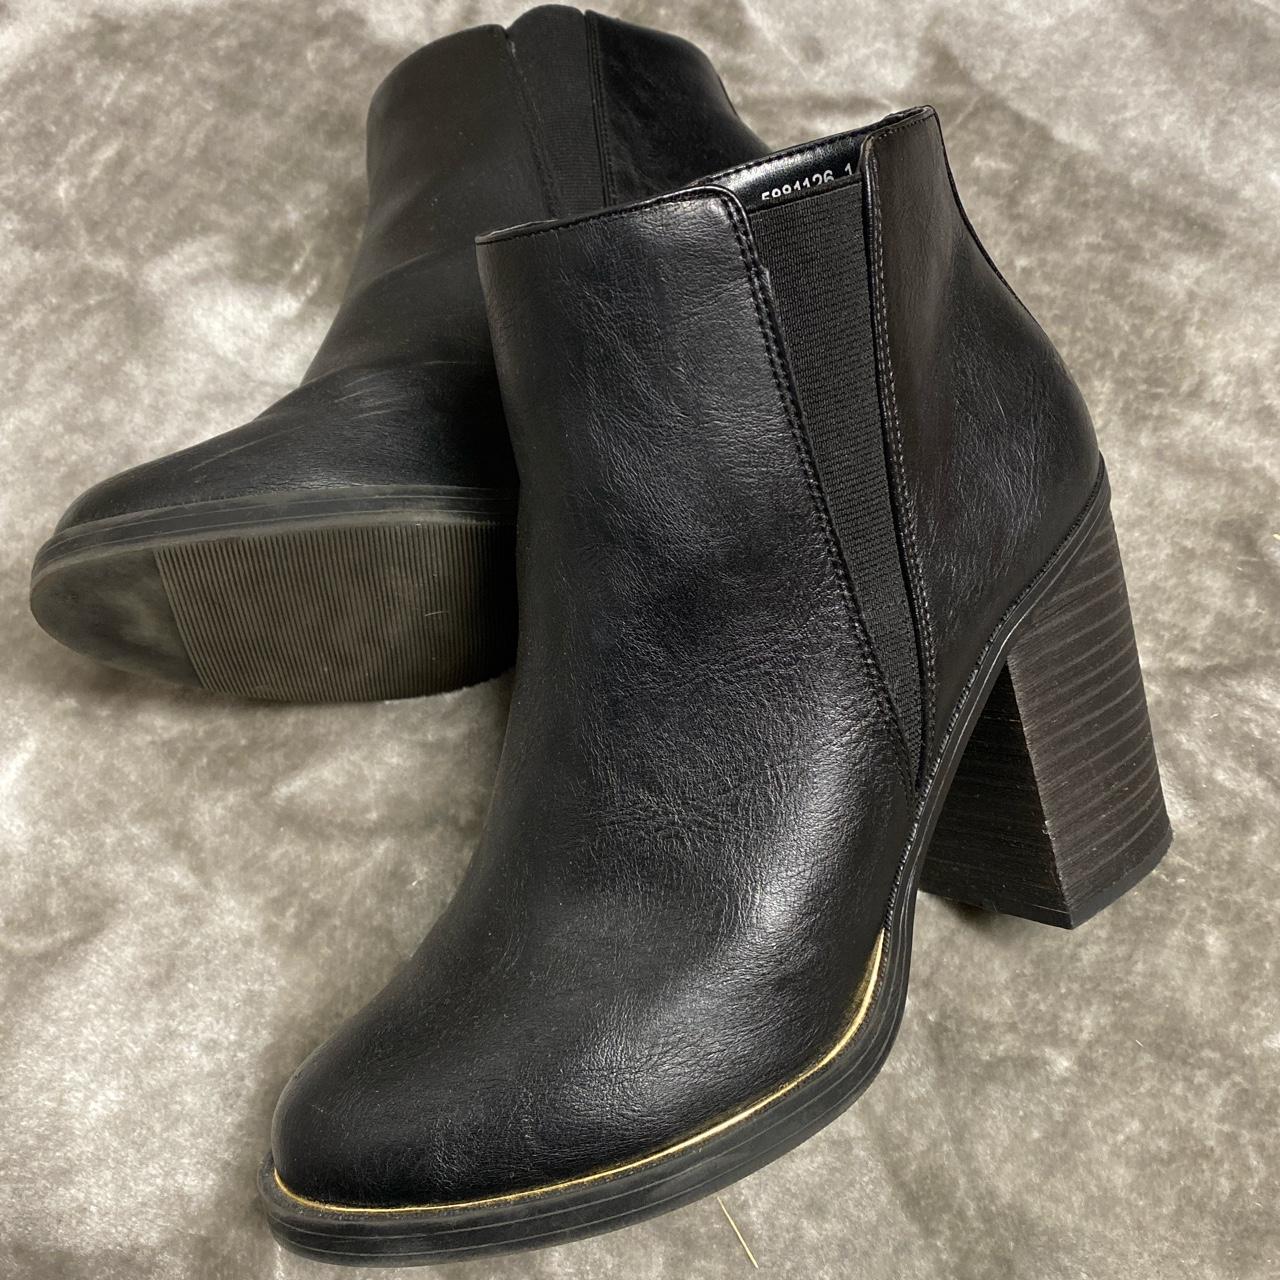 🖤 New look Black ankle boots heel high 4 inches... - Depop